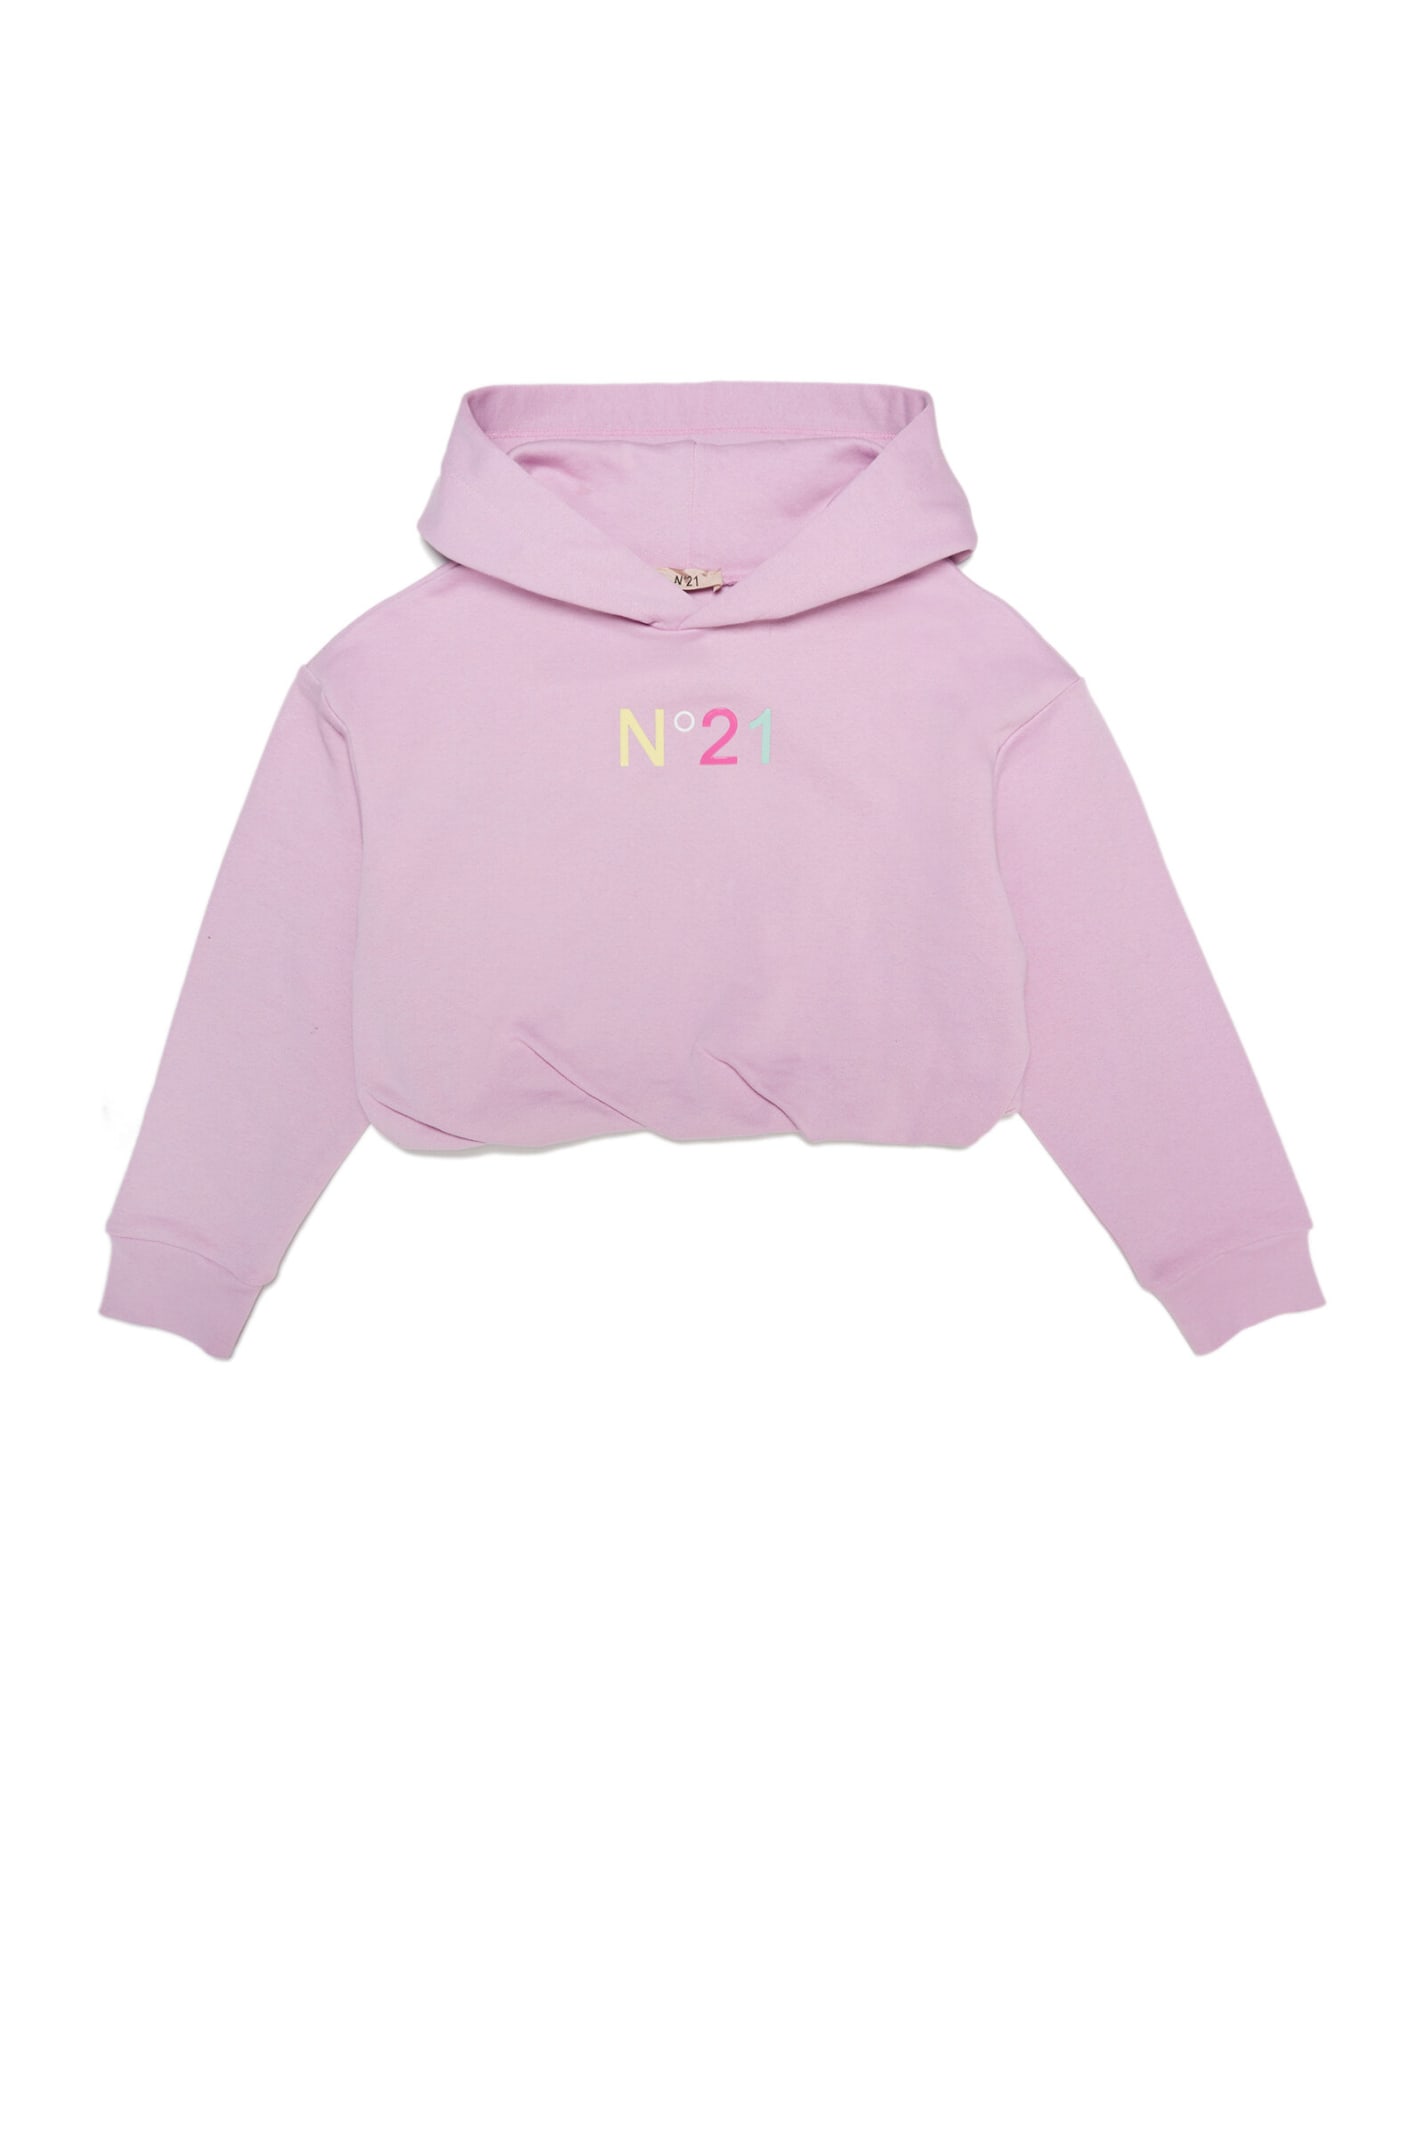 N°21 N21S166F SWEAT-SHIRT N°21 PINK CROPPED SWEATSHIRT WITH HOOD, MULTICOLOURED LOGO AND GATHERS AT THE B